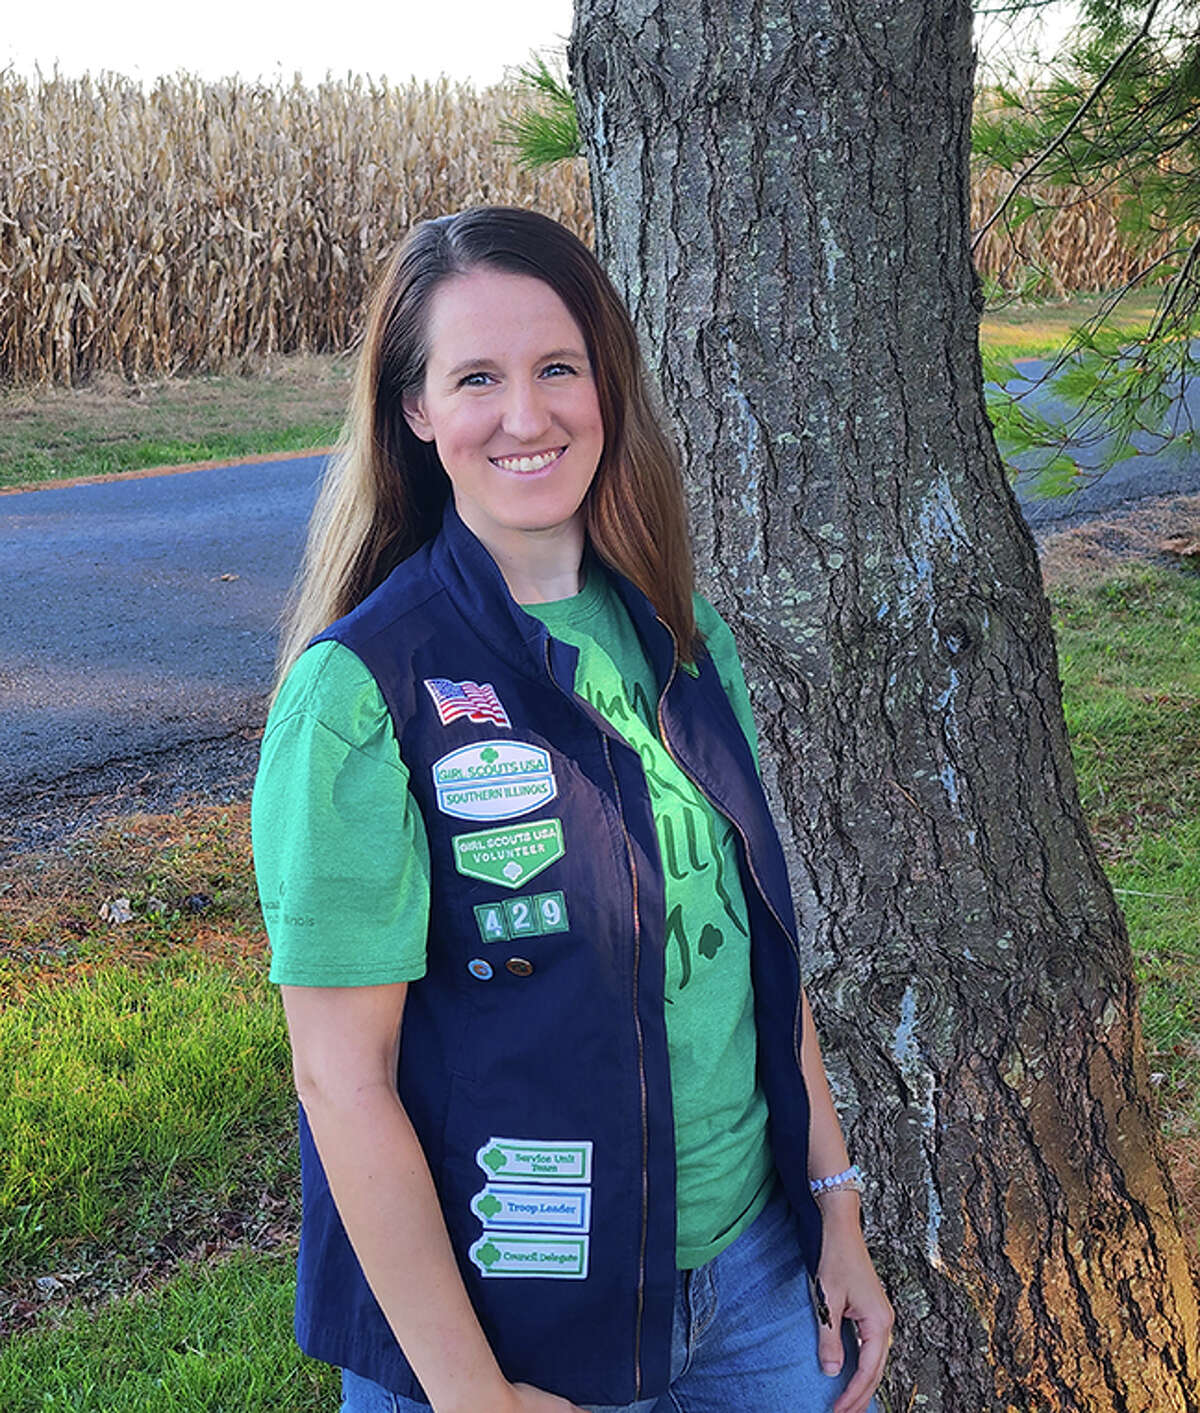 Courtney Bilyeu of Hamel is a frequent volunteer for the Girl Scouts, including having her own troop of third-grade Brownies and being a service unit manager.